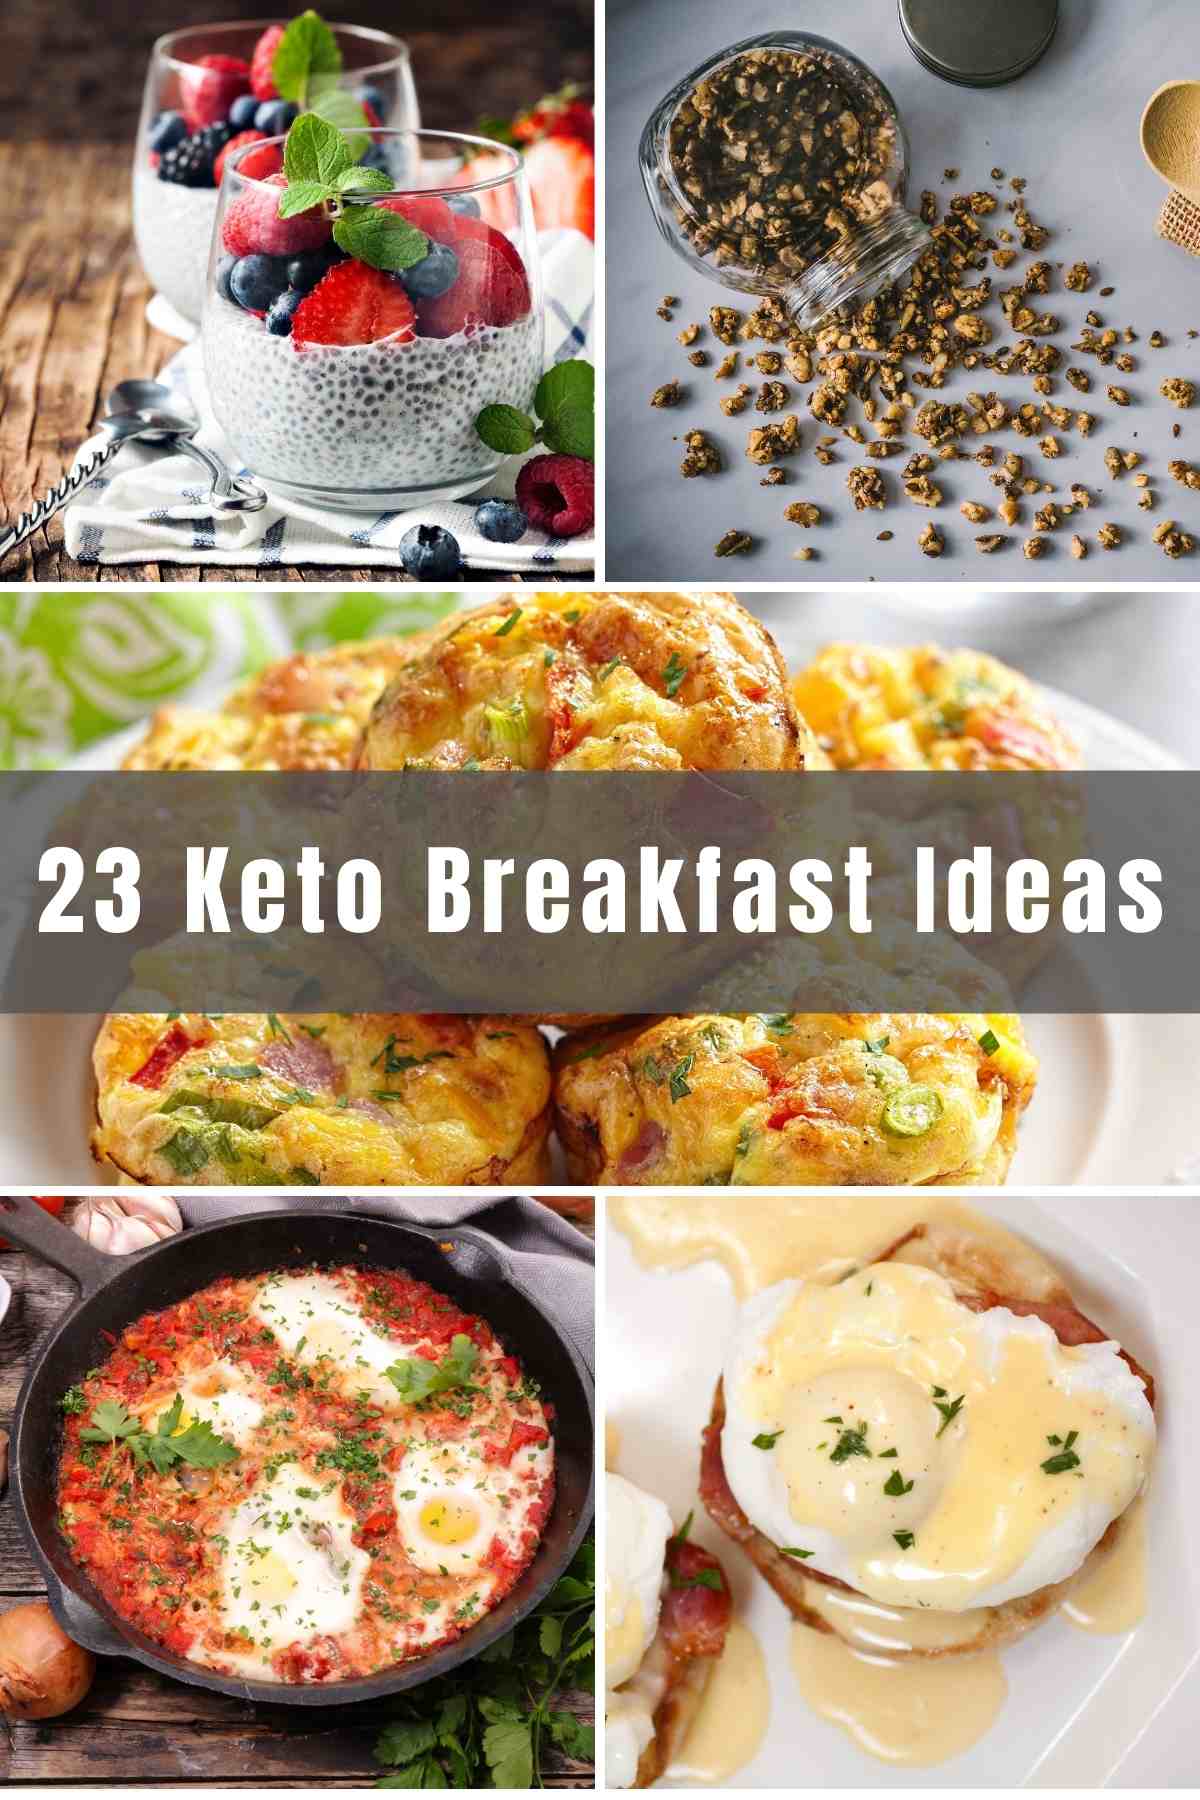 Are you following the keto diet and looking for ways to switch up your breakfast options? Just because you’re focusing on very low-carb meals doesn’t mean it has to be boring! We’ve collected our favorite Easy Keto Breakfast Ideas that'll keep you full all morning while maintaining your carb count too.